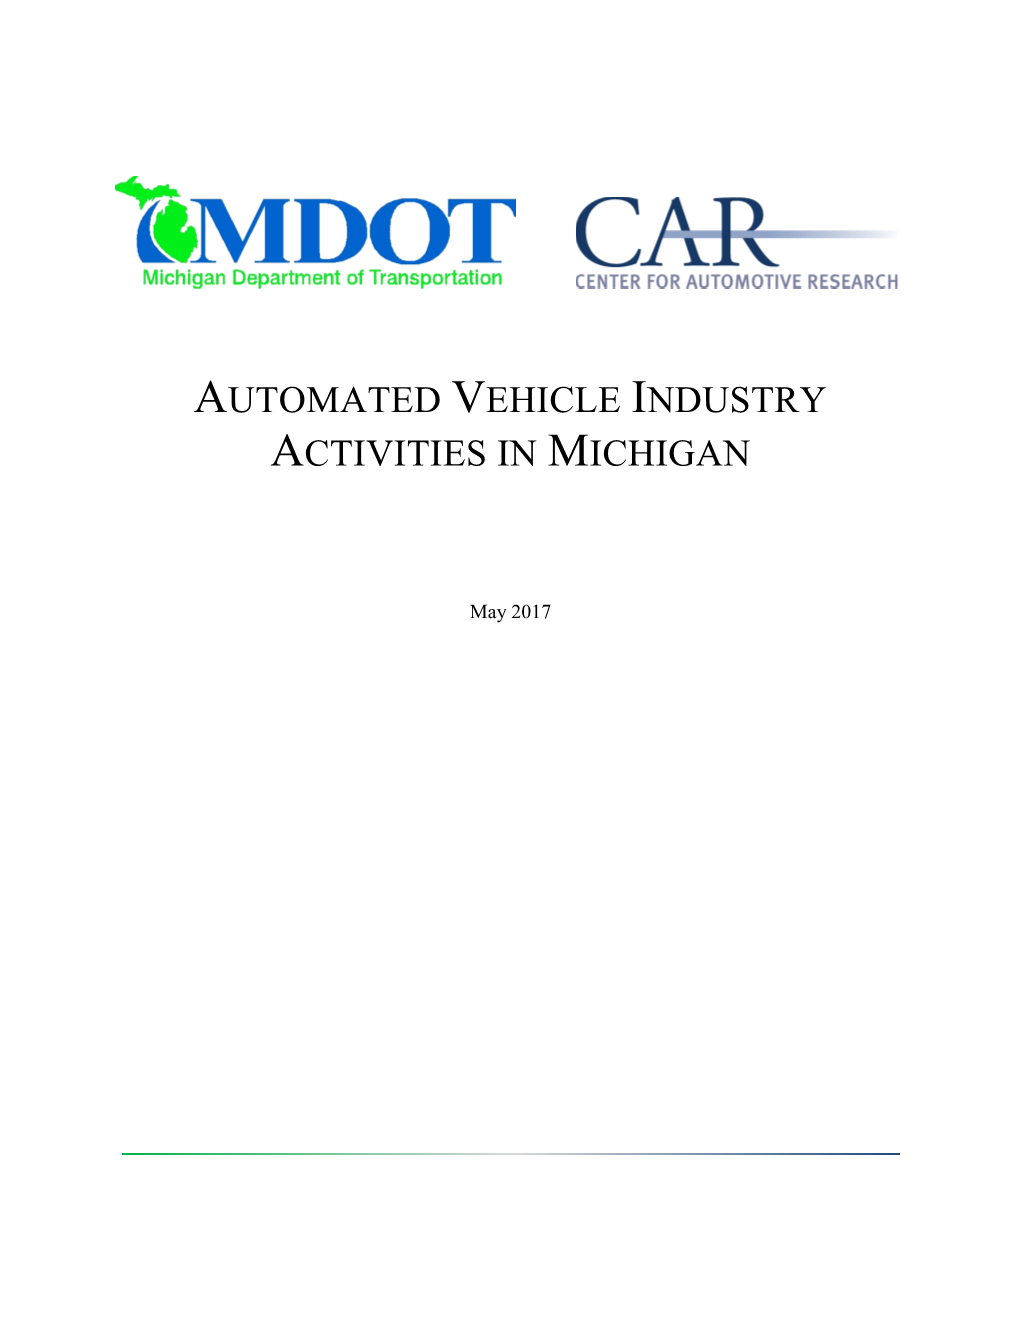 Automated Vehicle Industry Activities in Michigan